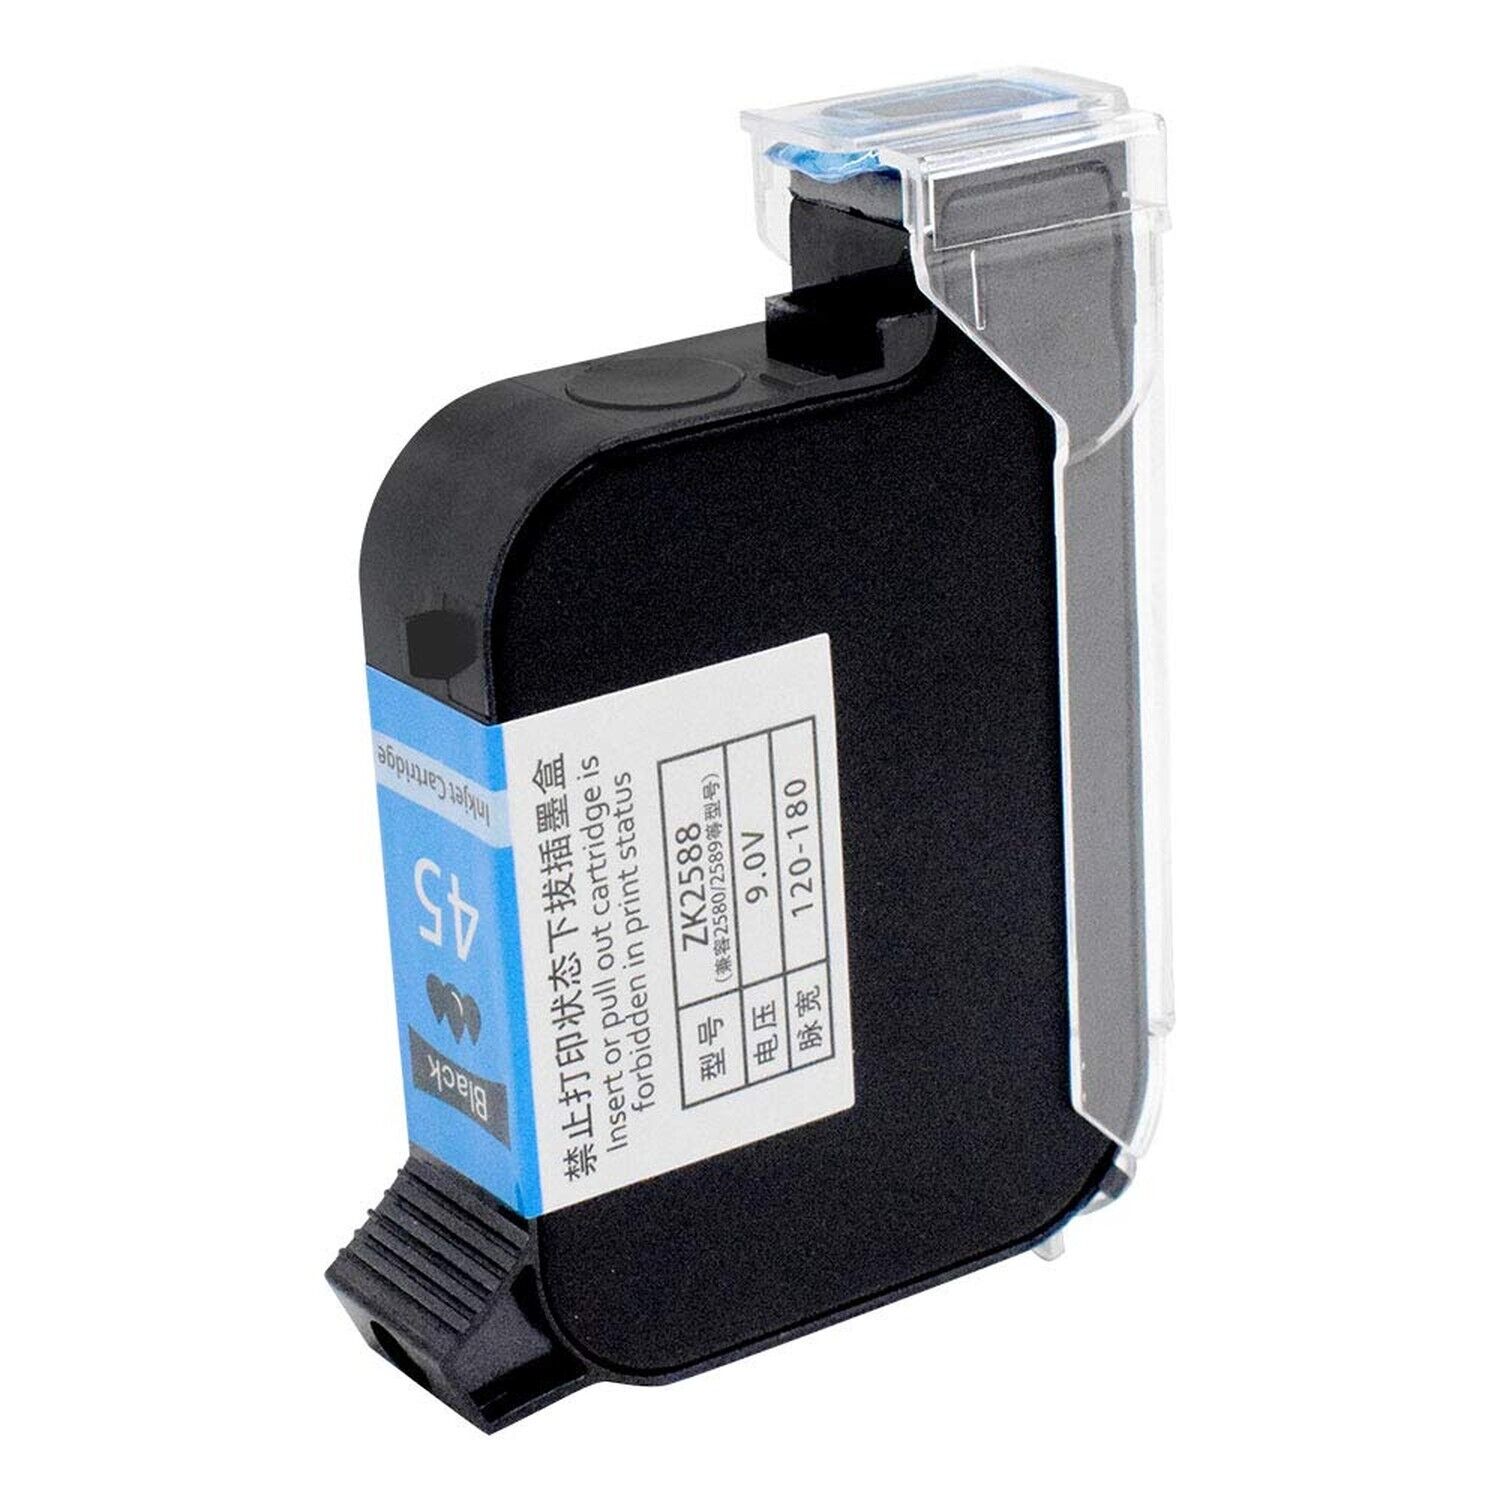 TOAUTO Original Portable Ink Cartridge Quick-Dry Replacement 42ml Ink Cartrid...